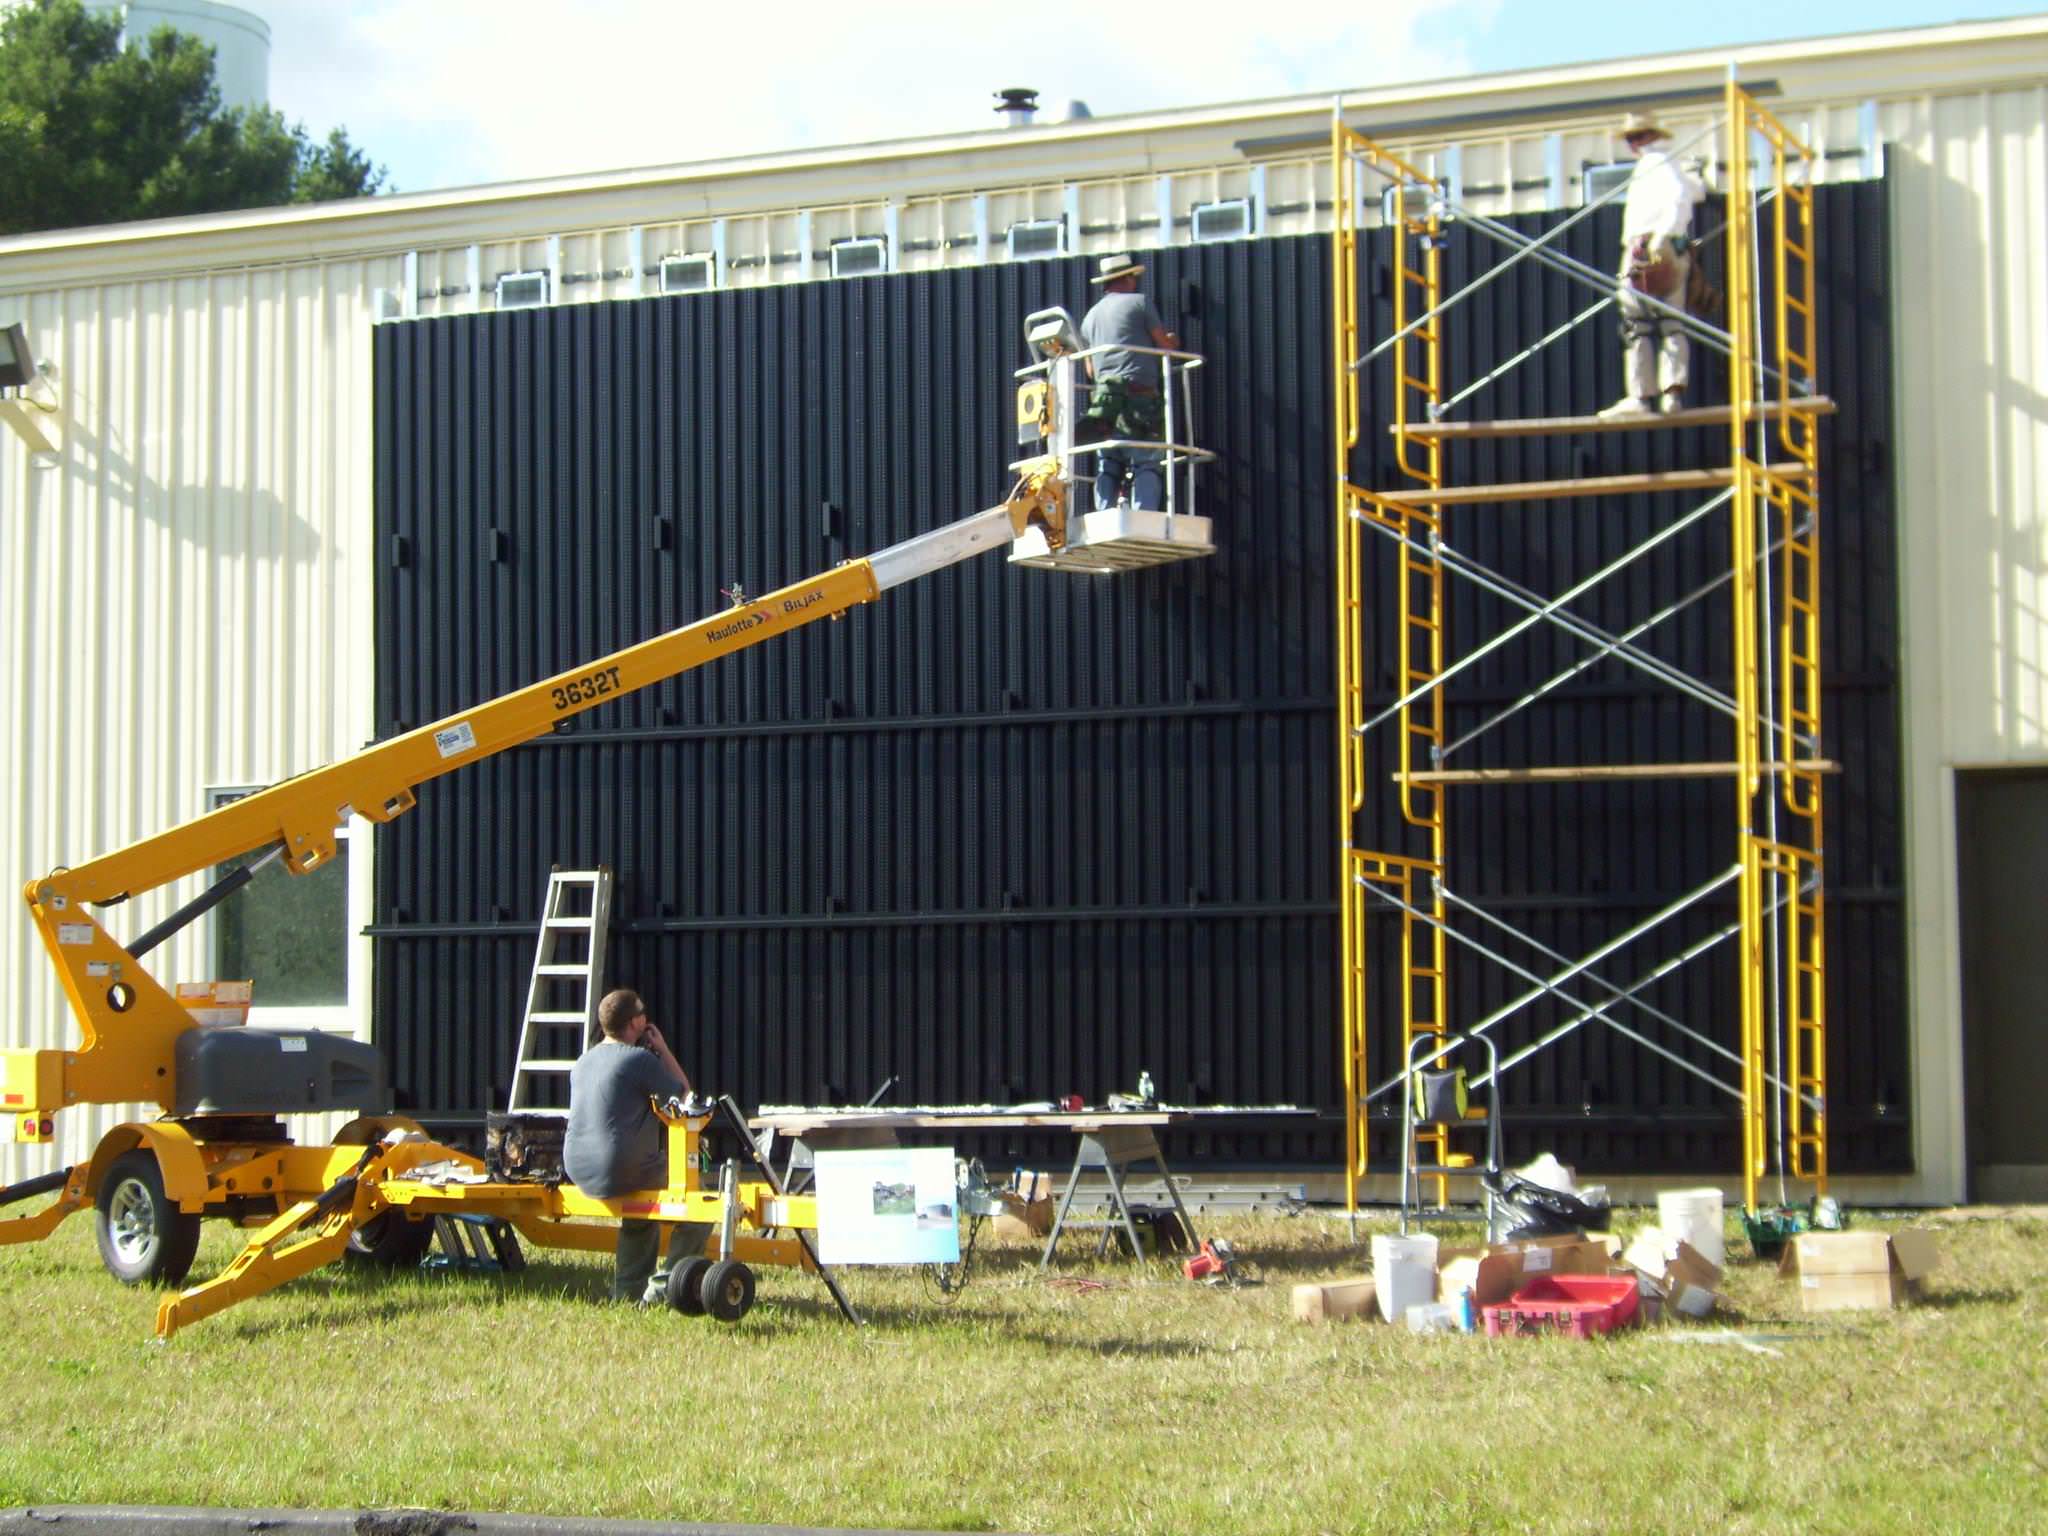 workers installing a solar wall at the Wicked Joe coffee company, there's a crane and rafters against a building lined with solar panels